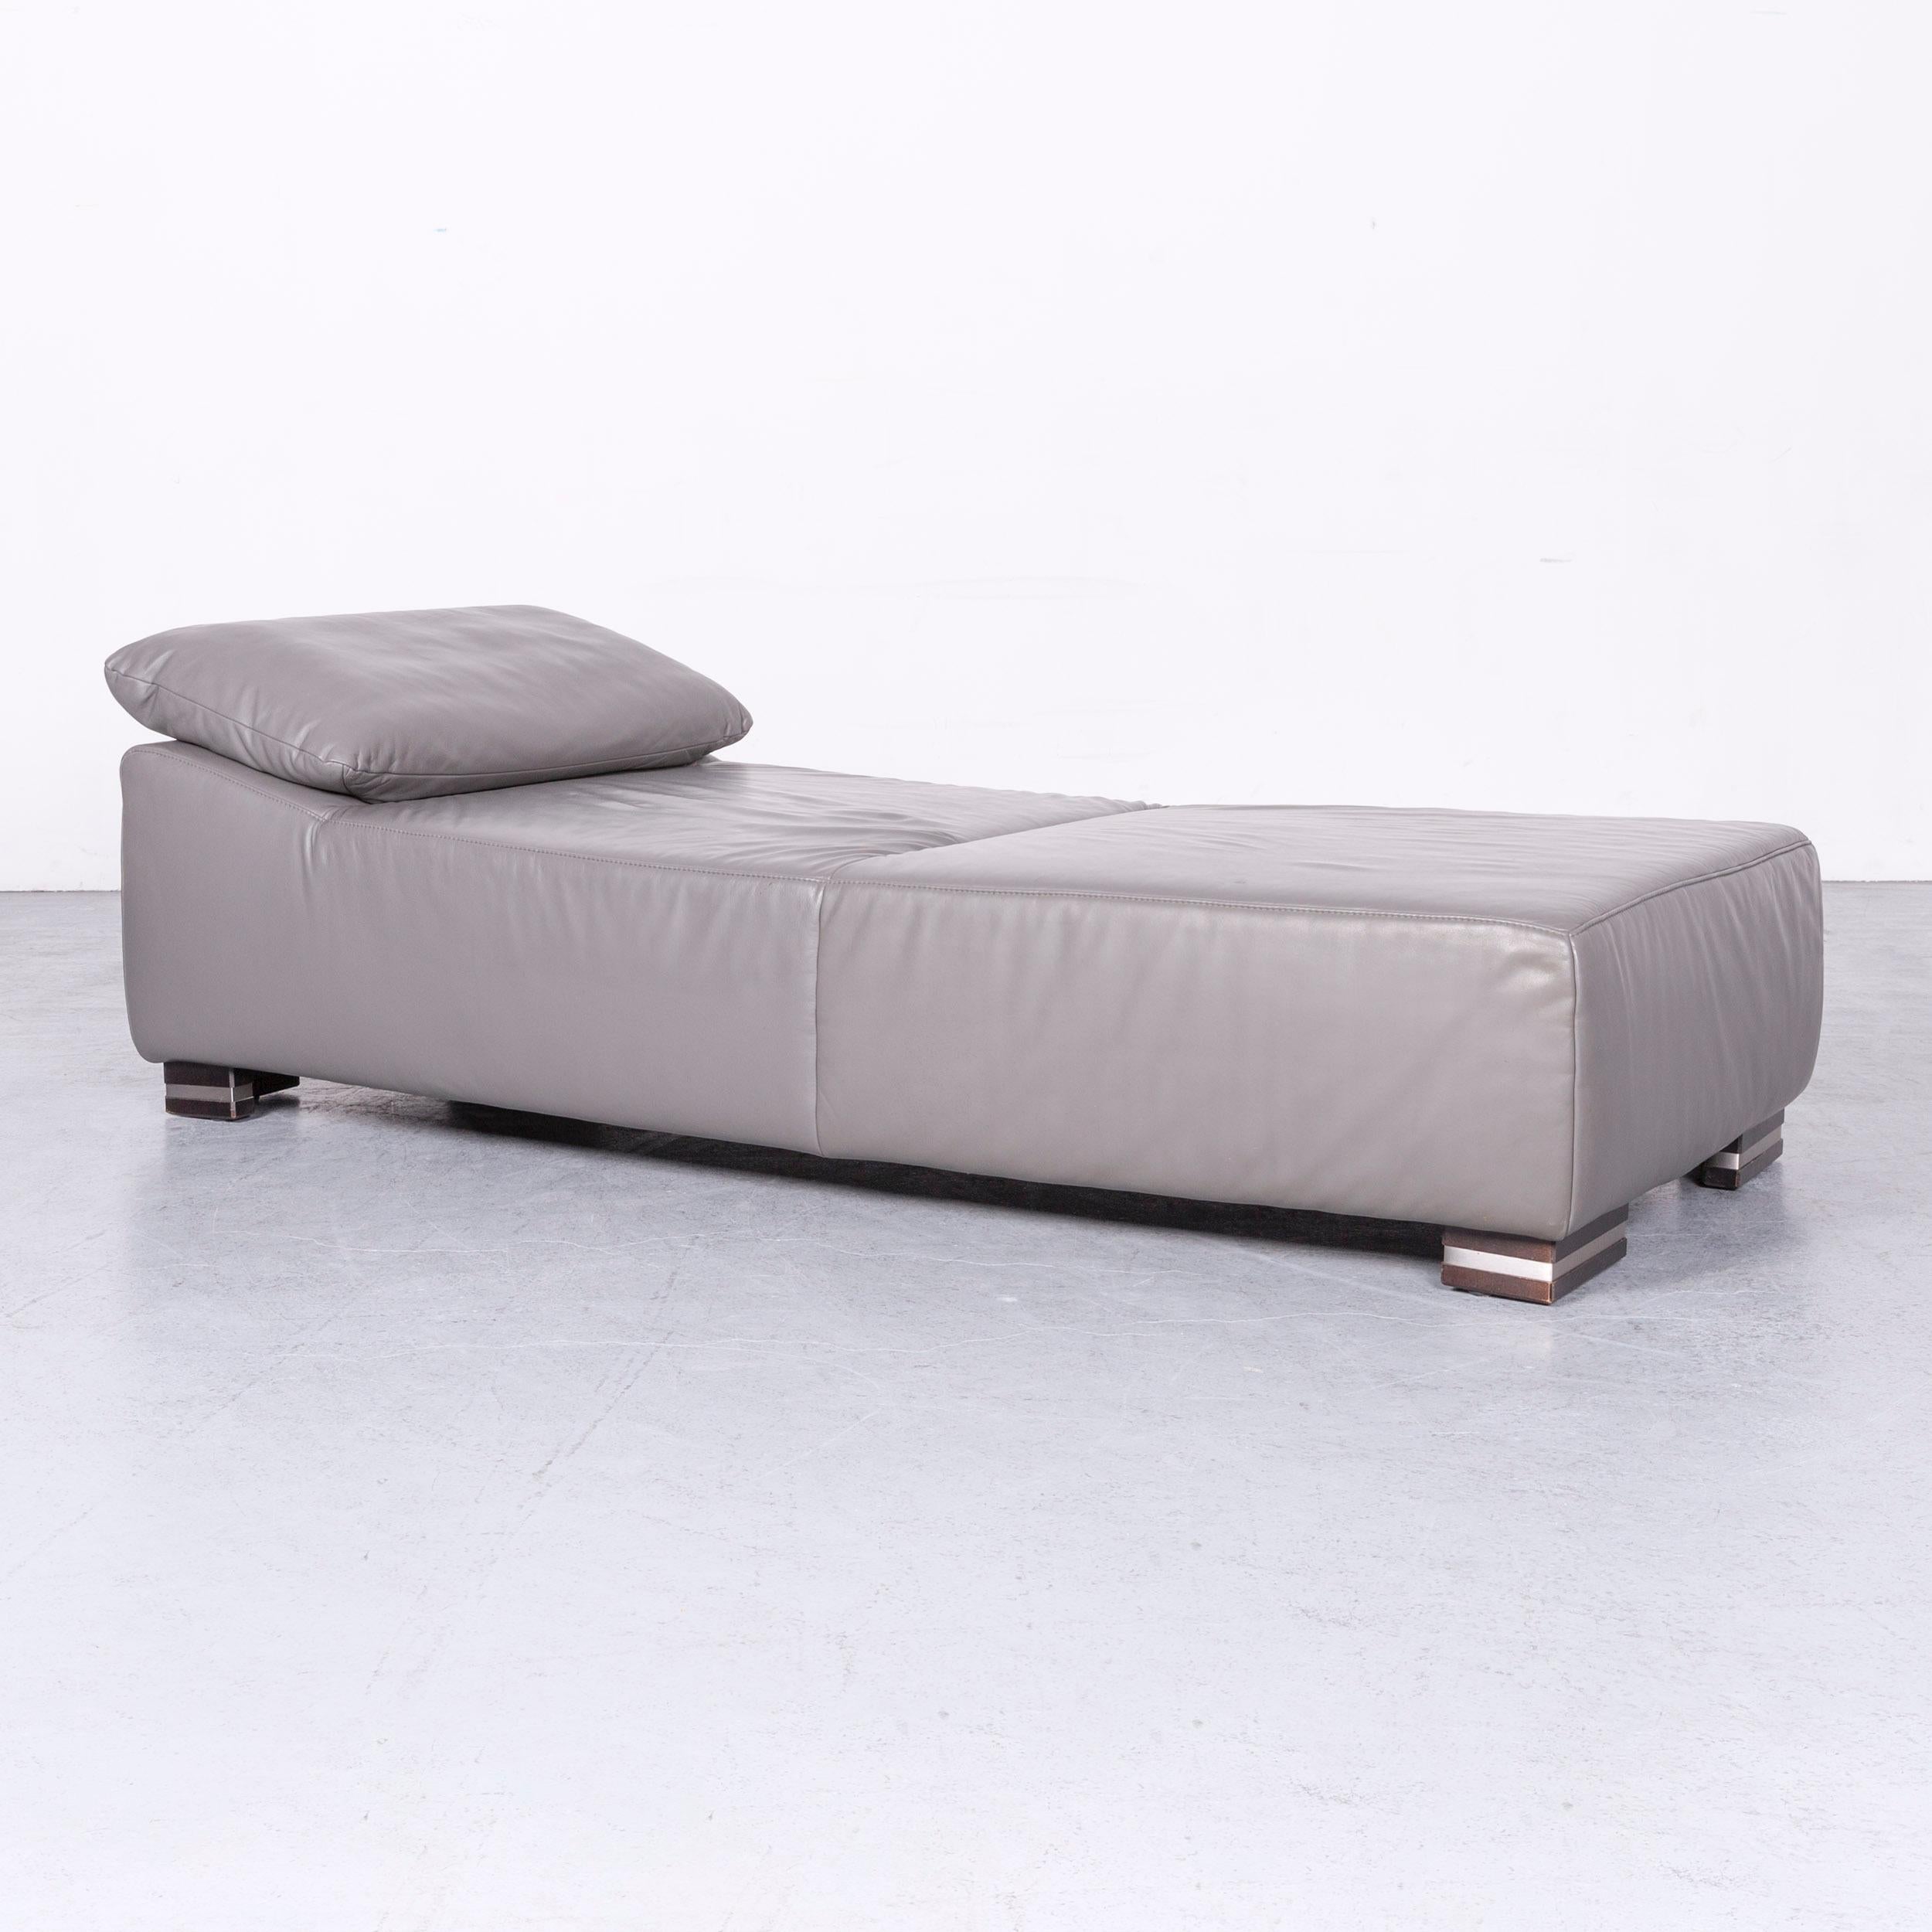 We bring to you an Ewald Schillig designer couch leather grey one-seat modern.